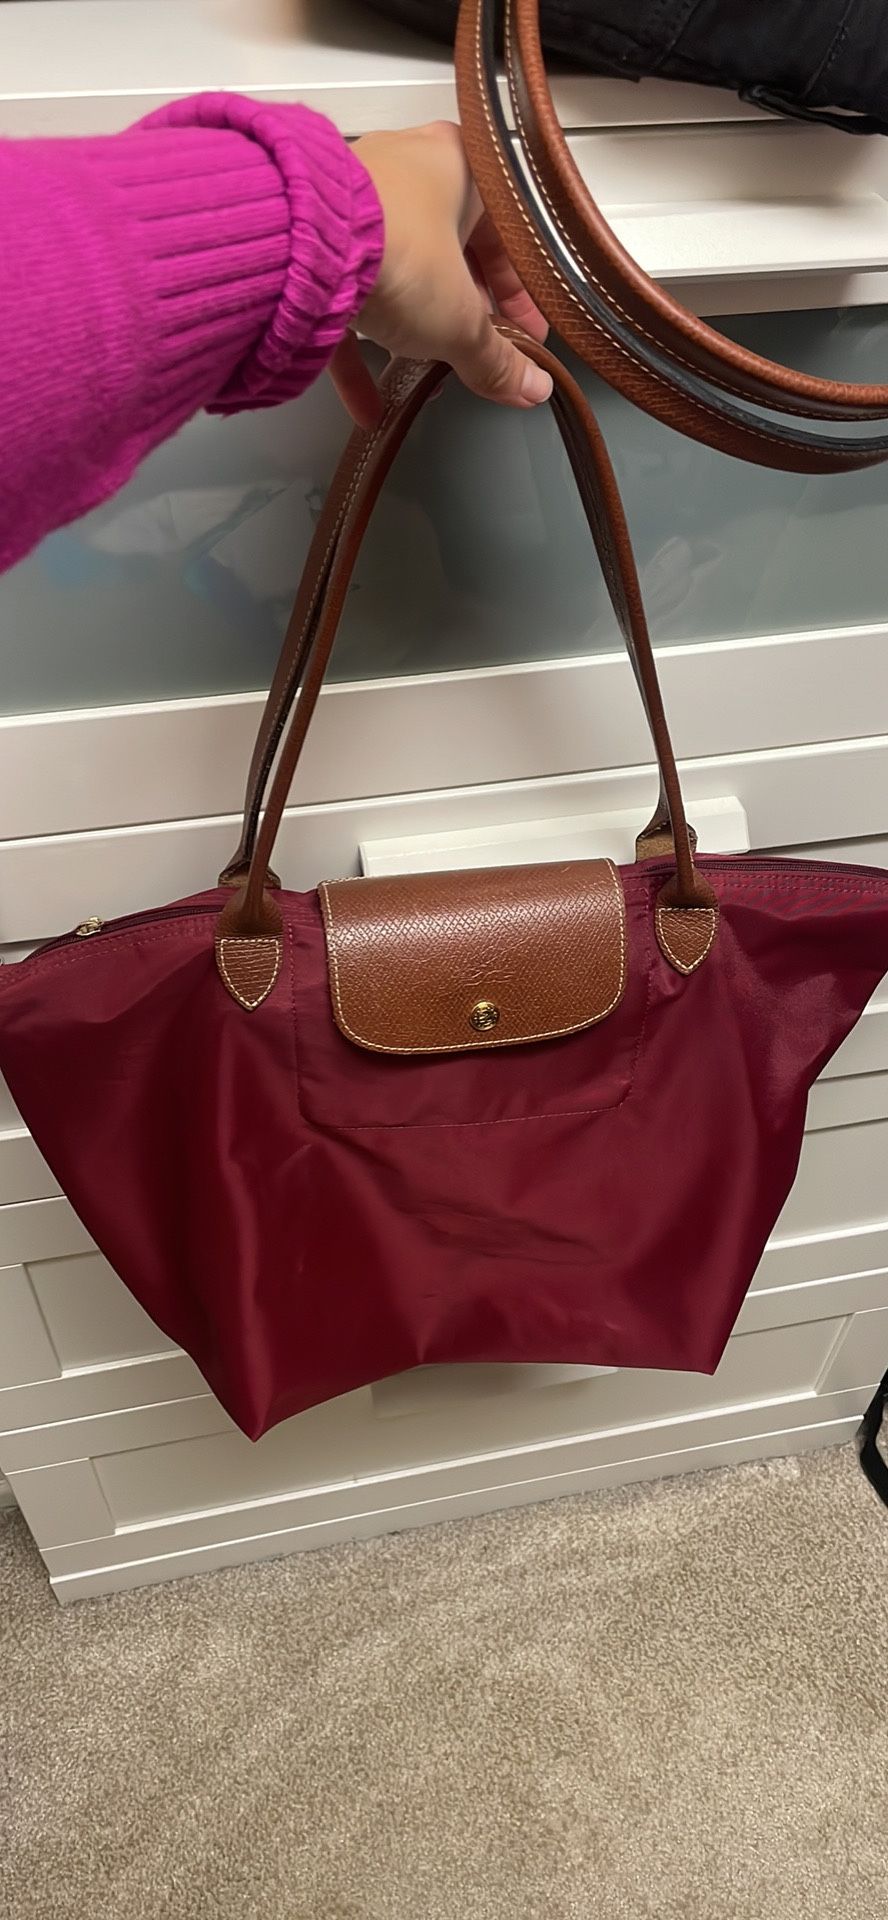 Two - Longchamp Purses for Sale in Camarillo, CA - OfferUp